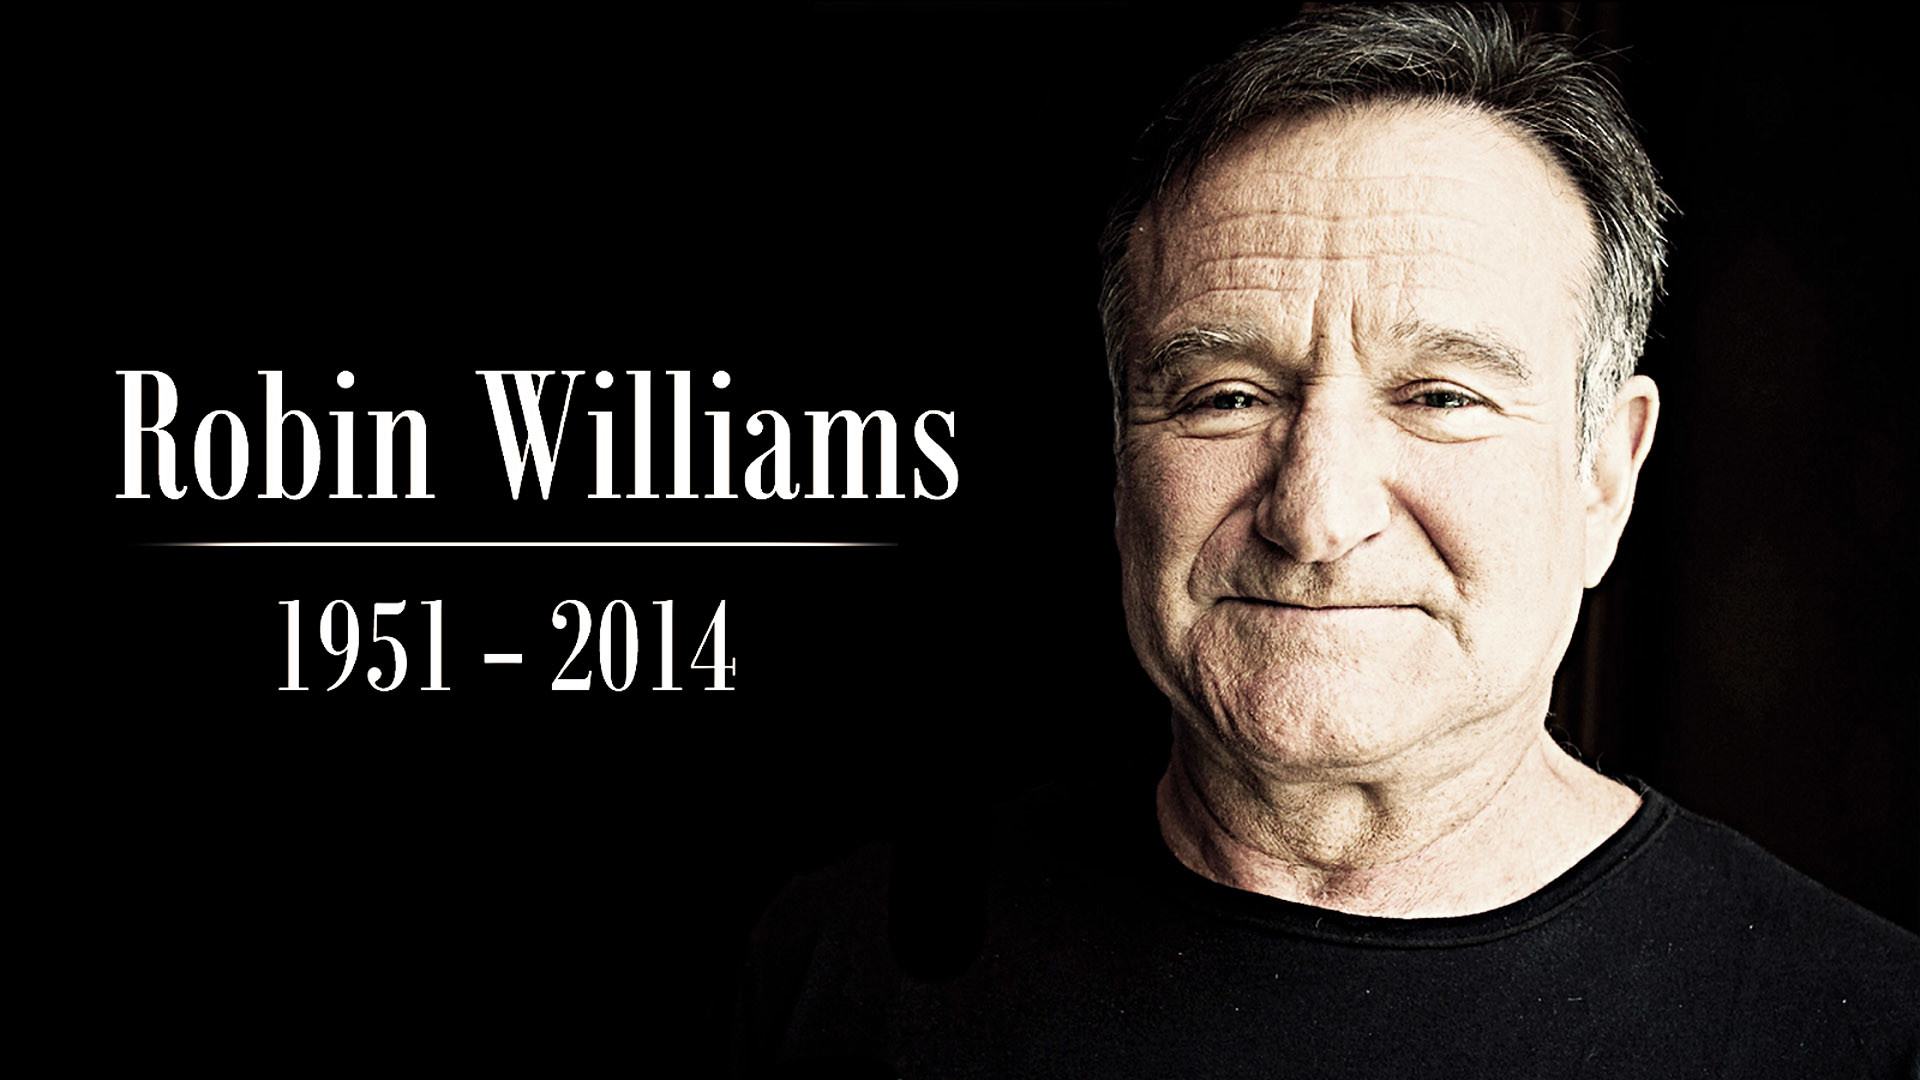 1920x1080 Tag: HDQ Robin Williams Wallpapers, Backgrounds and Pictures for Free,  Deangelo Beverley